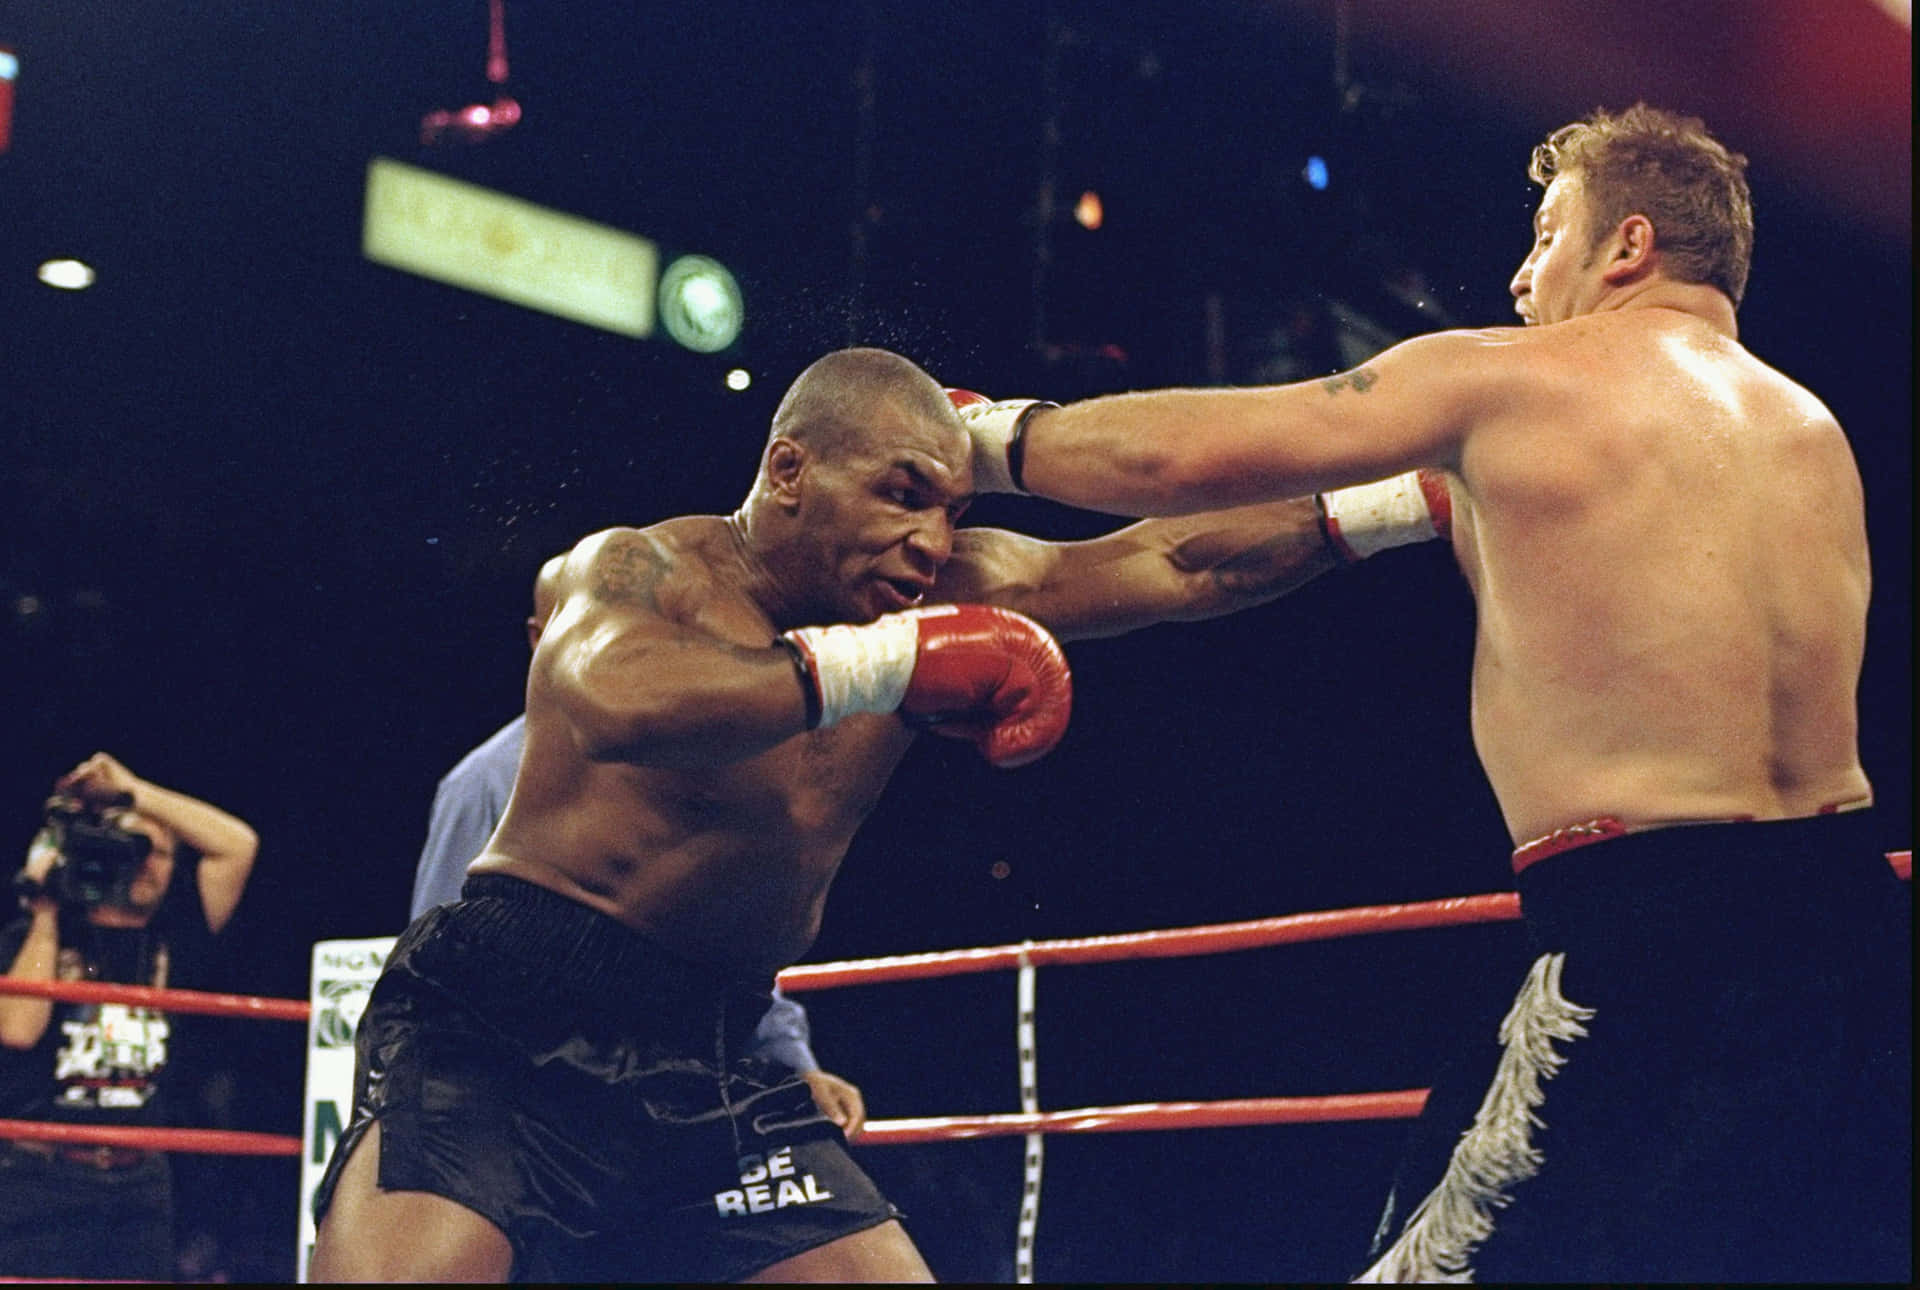 Mike Tyson throwing a powerful punch in the ring